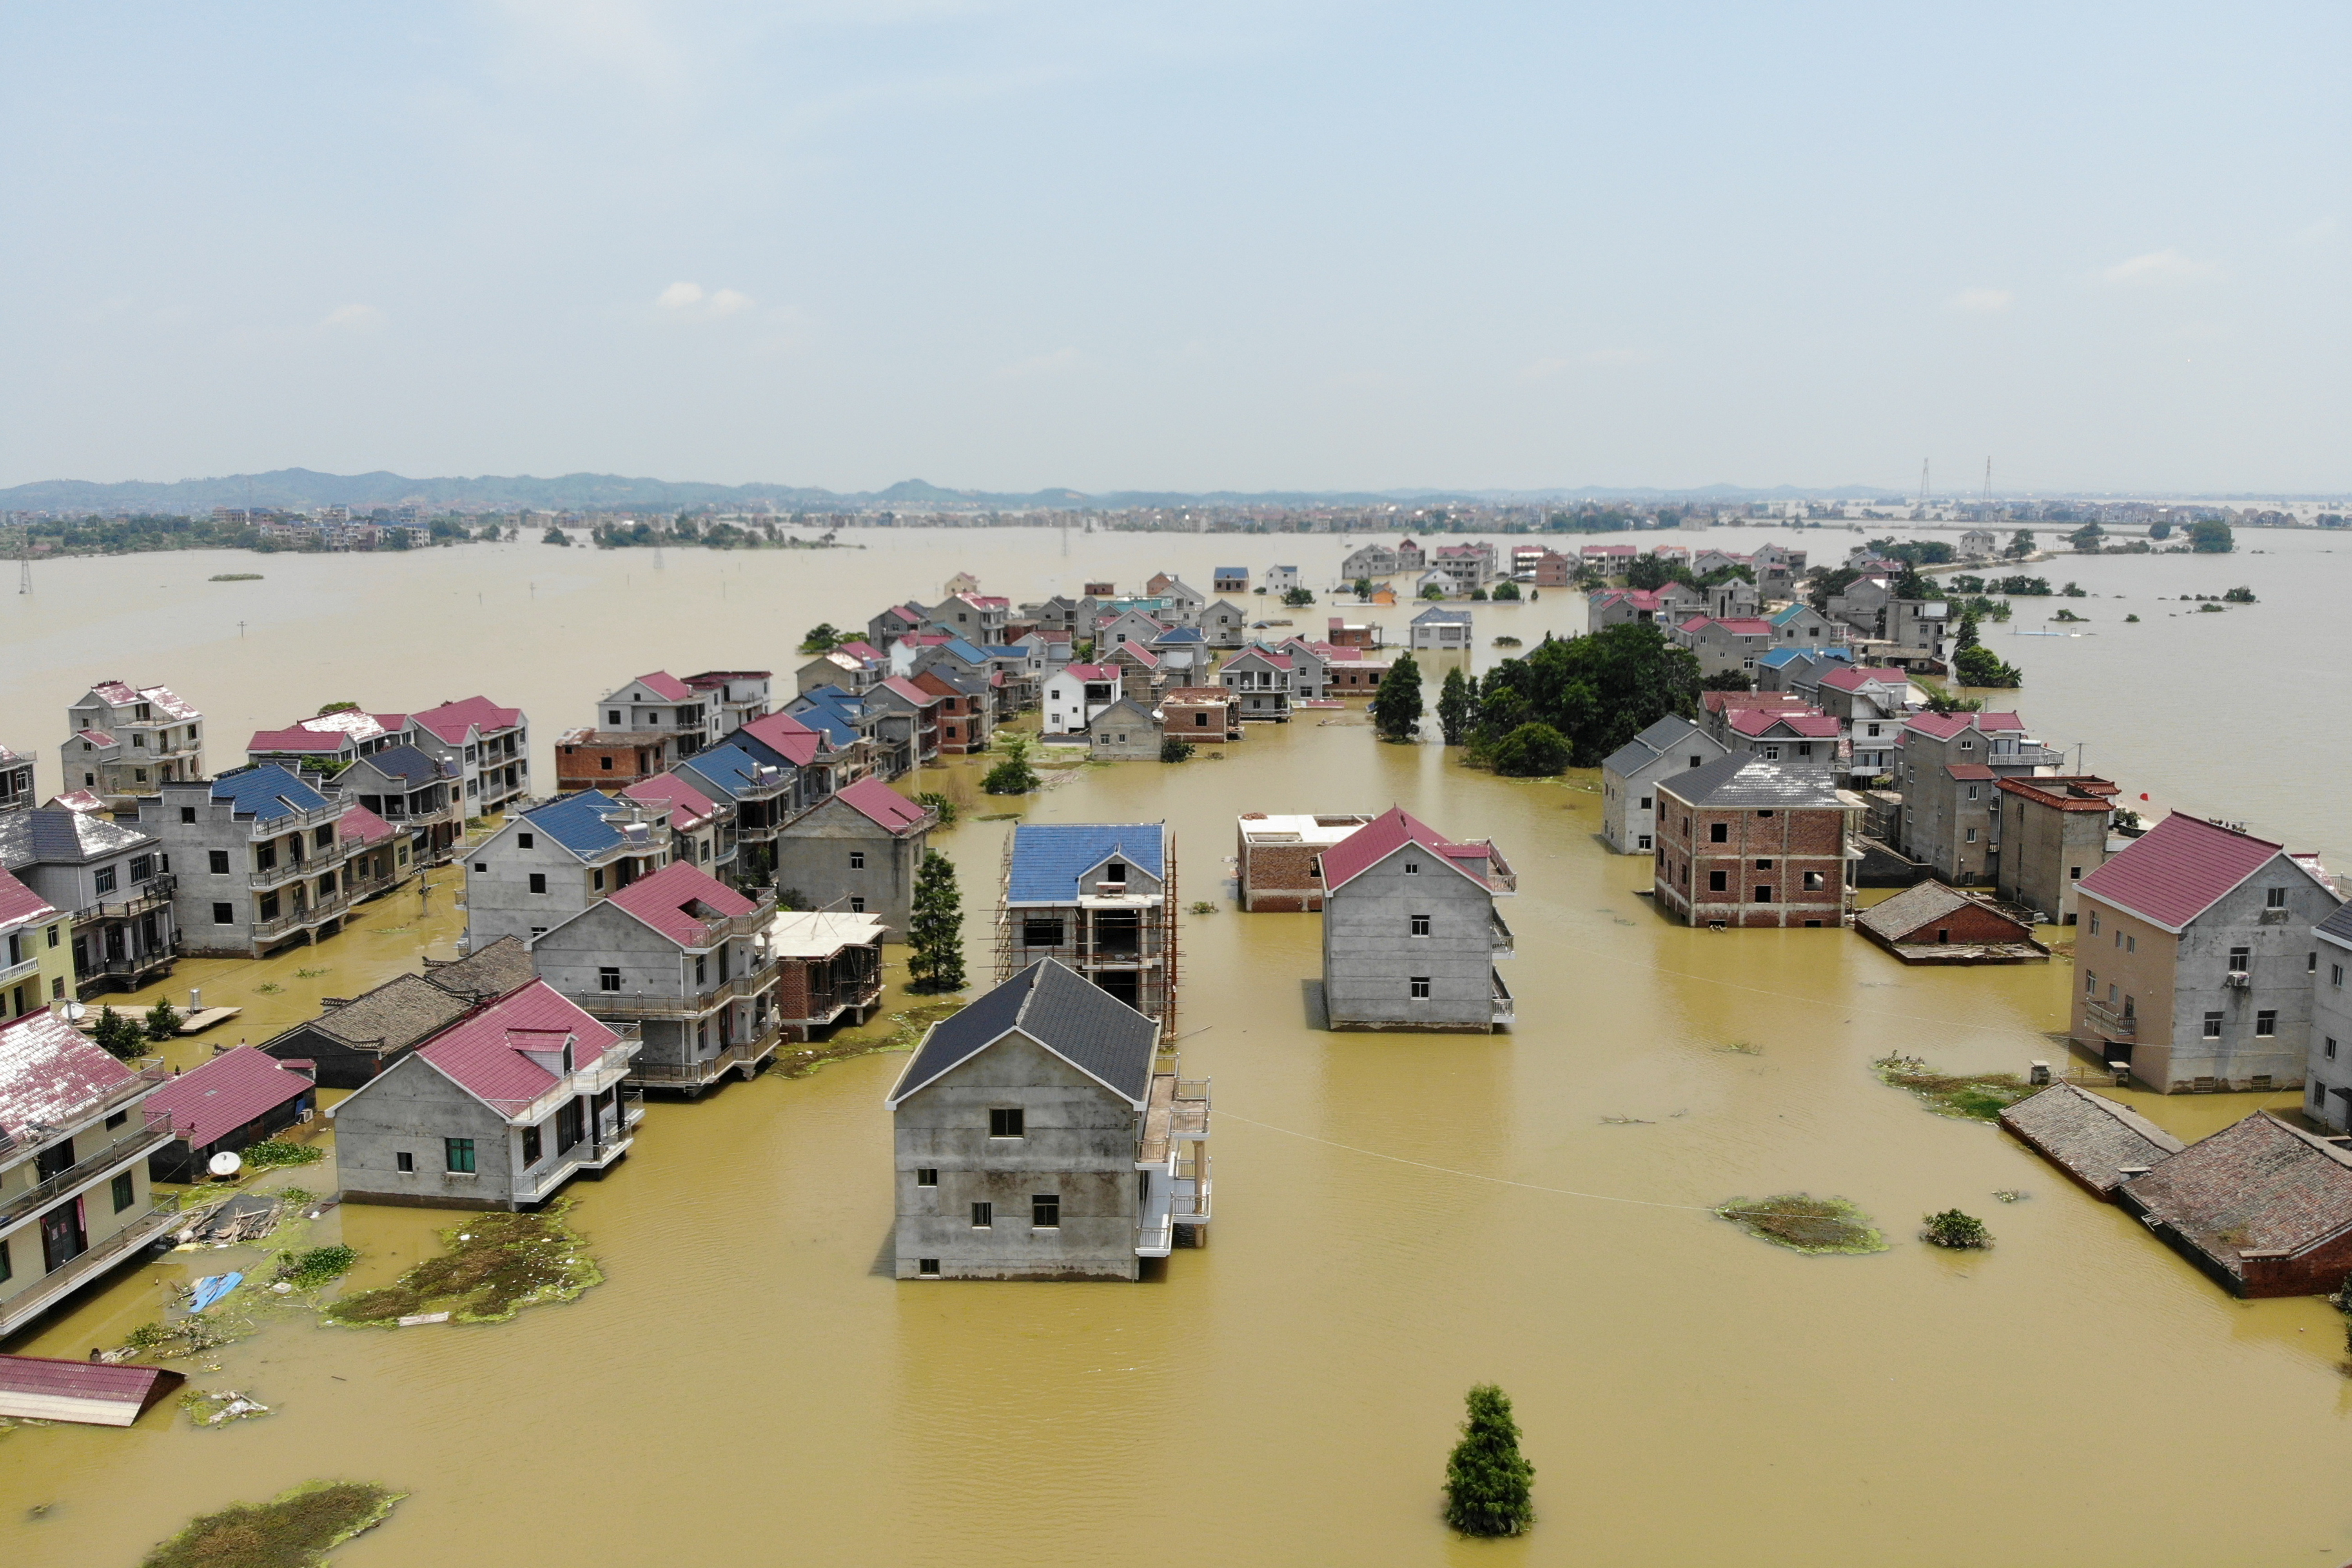 Buildings and farmlands are seen partially submerged in floodwaters following heavy rainfall in Poyang county of Jiangxi